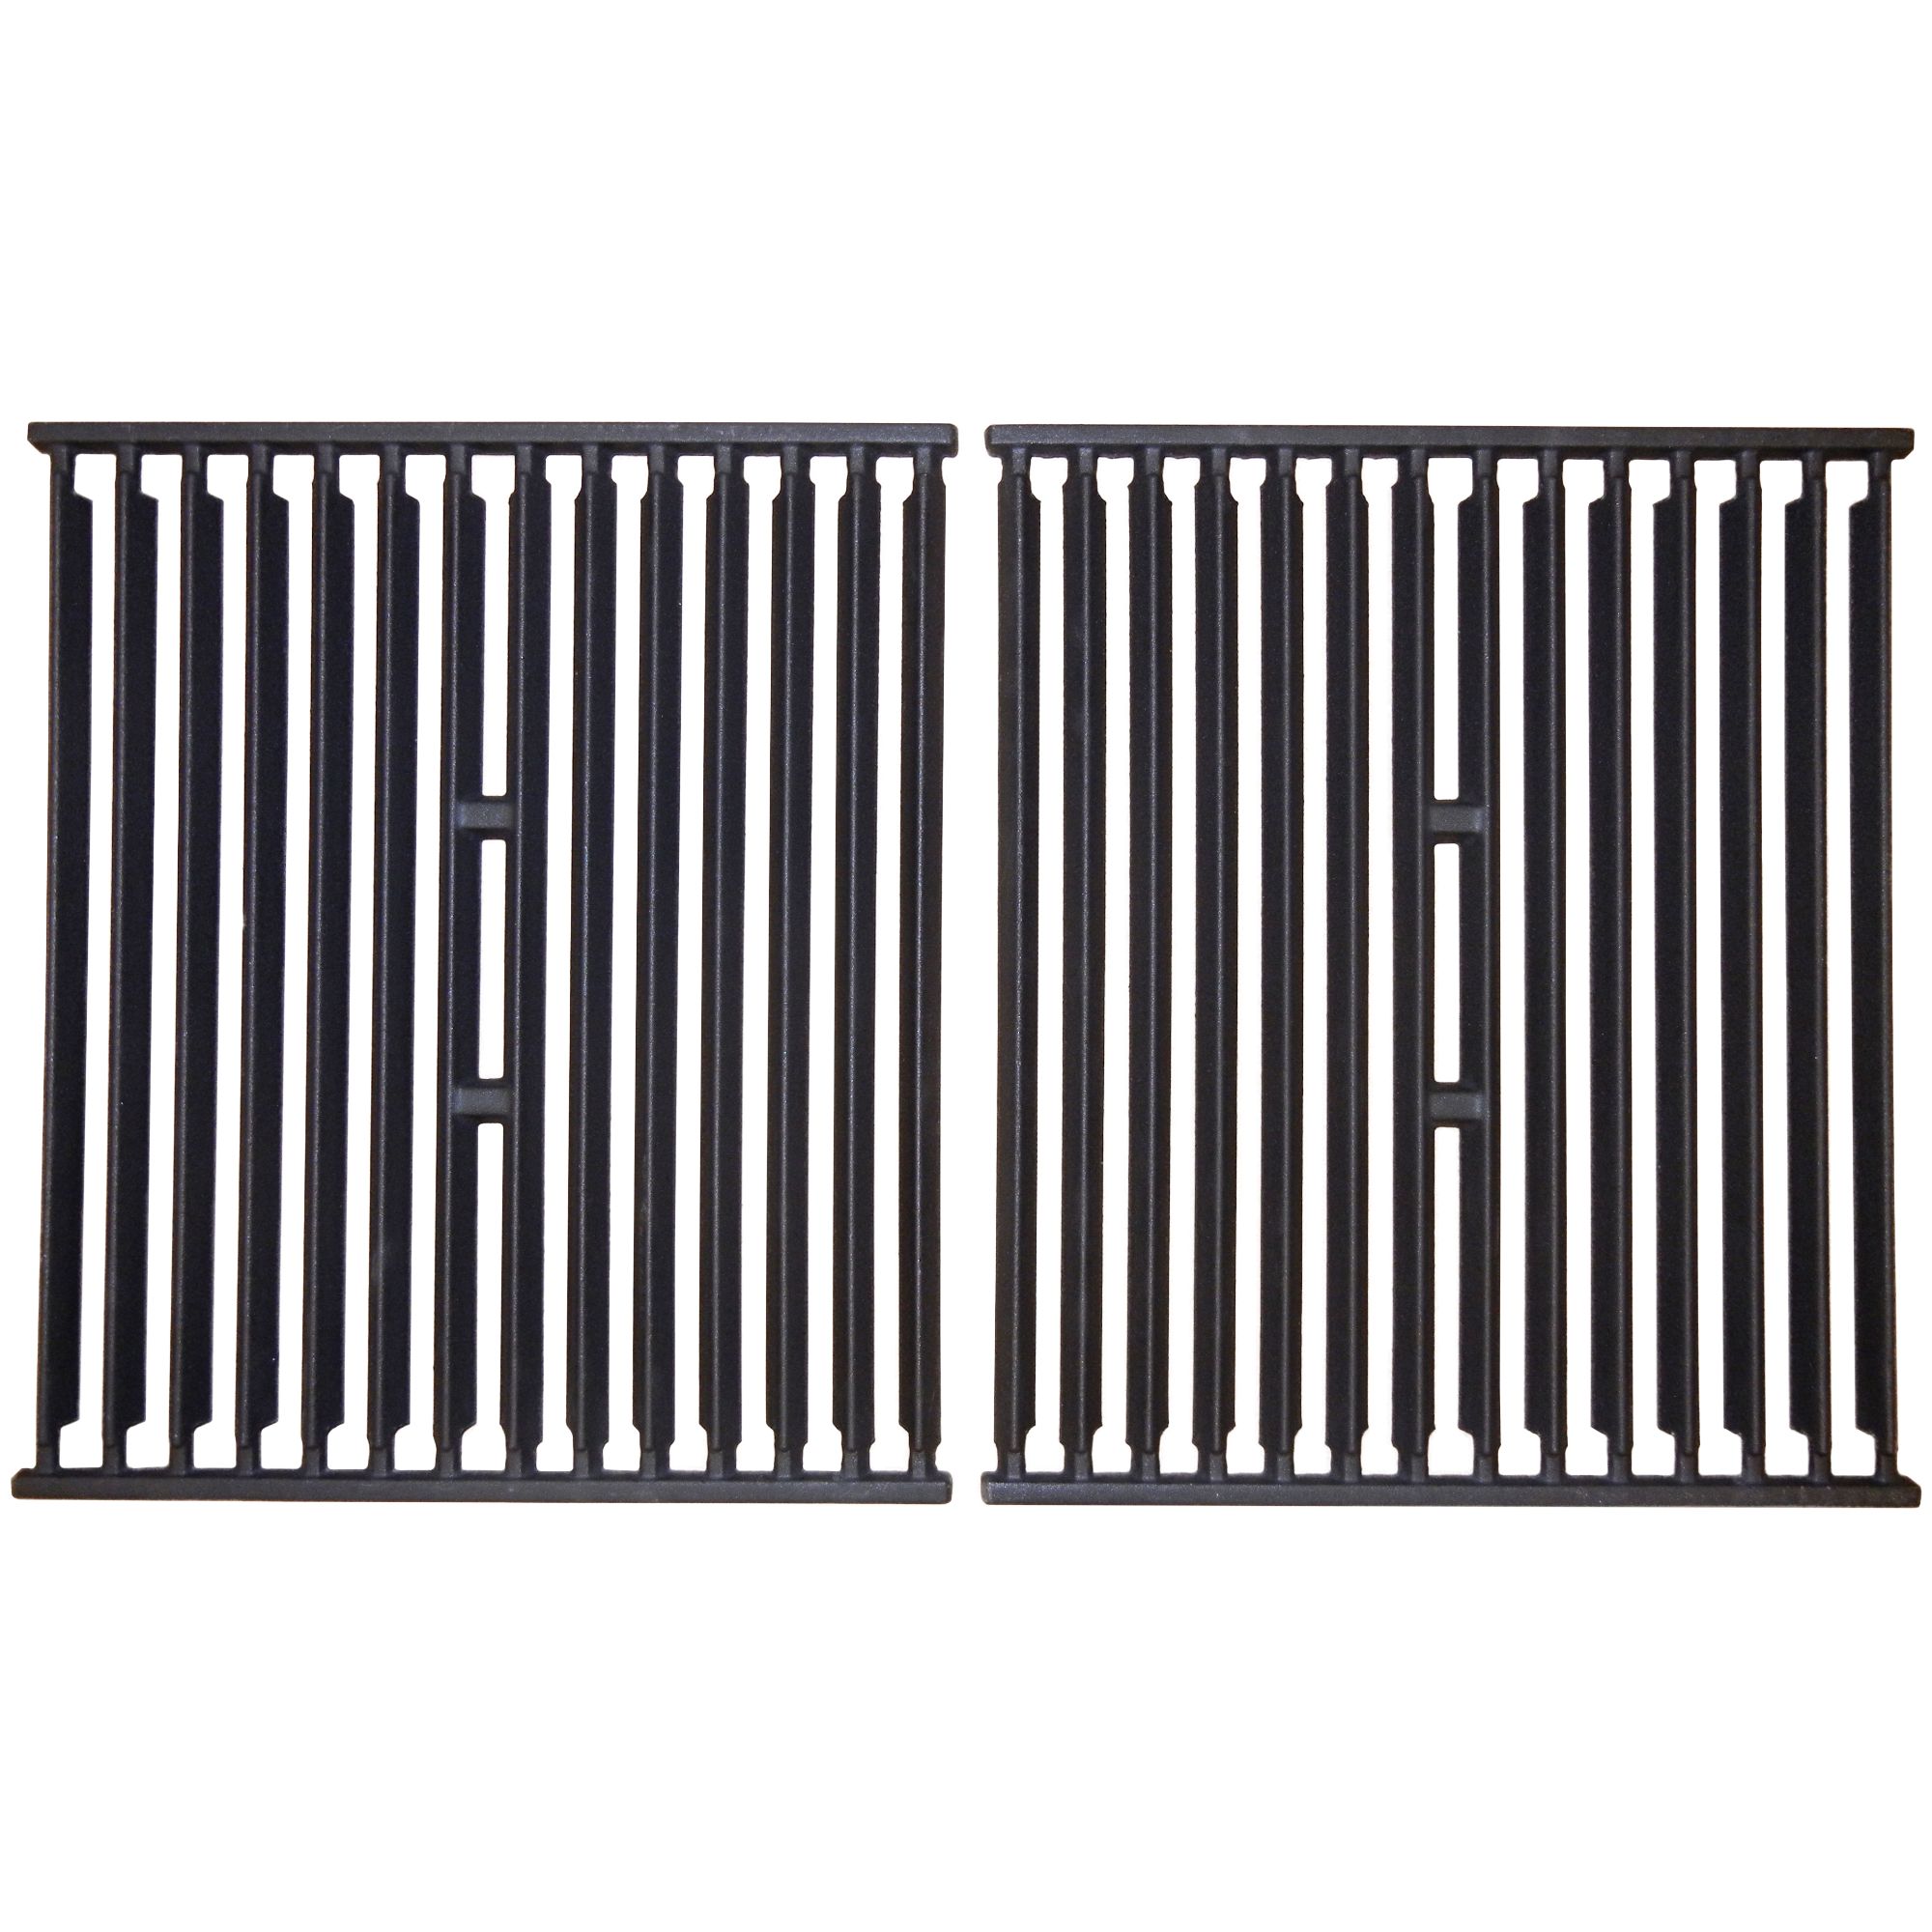 2pc Matte Cast Iron Cooking Grid for Broil King and Broil King Crown Gas Grills 25.5" - image 1 of 2